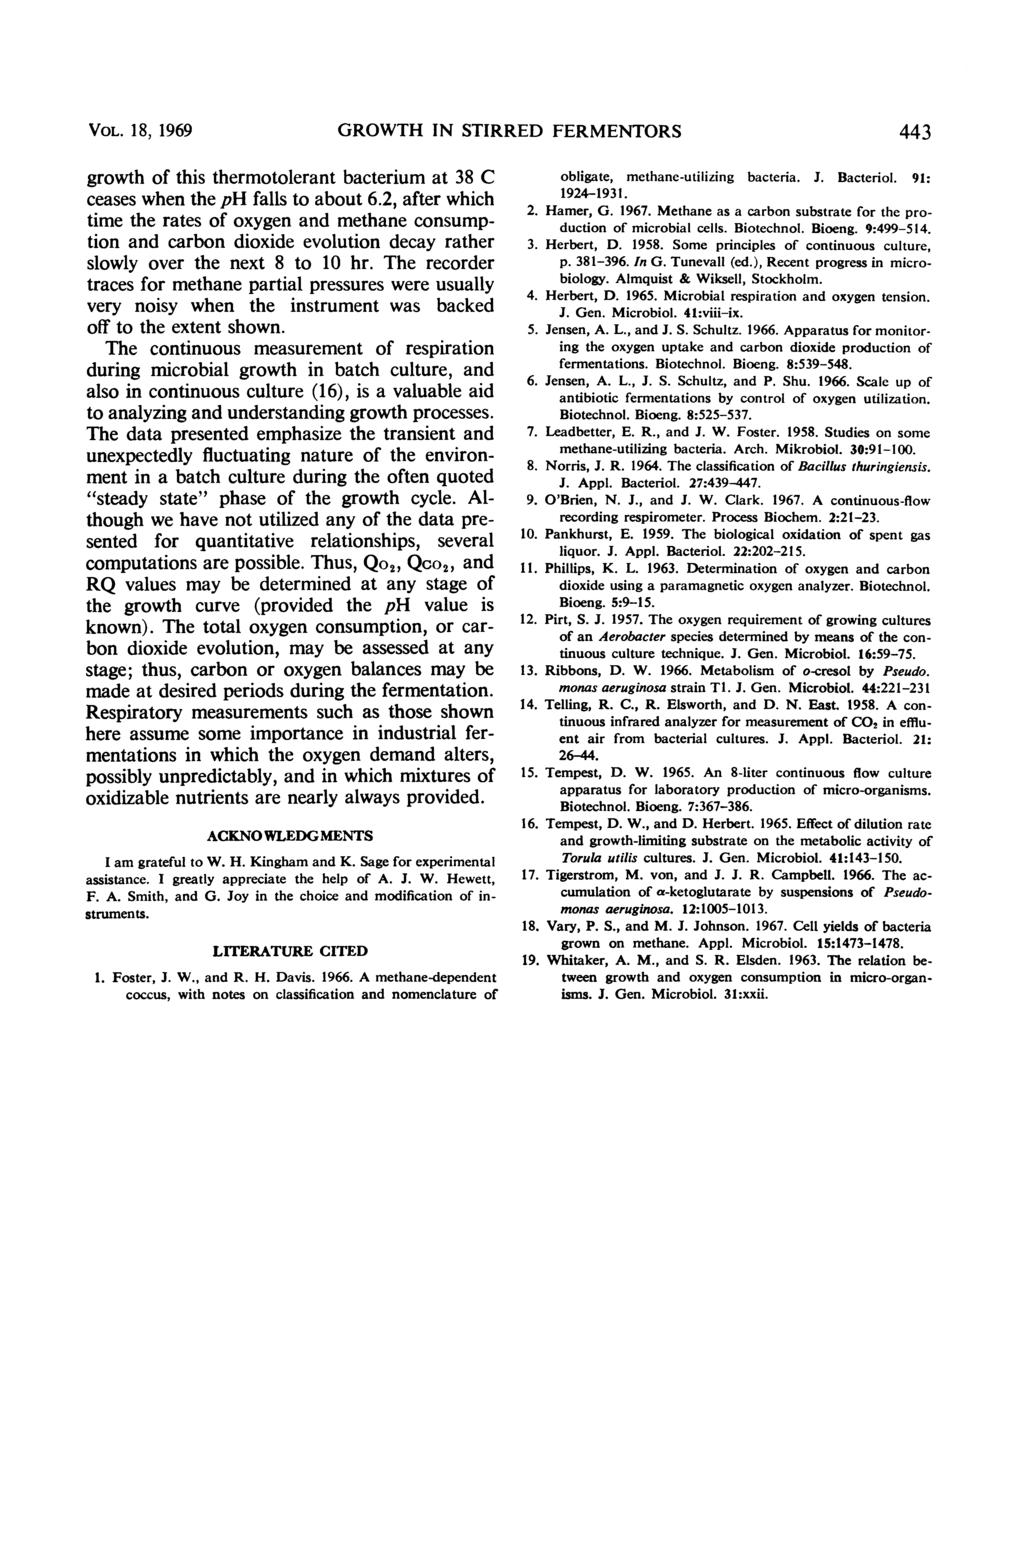 VOL. 18, 1969 GROWTH IN STIRRED FERMENTORS 443 growth of this thermotolerant bacterium at 38 C ceases when the ph falls to about 6.